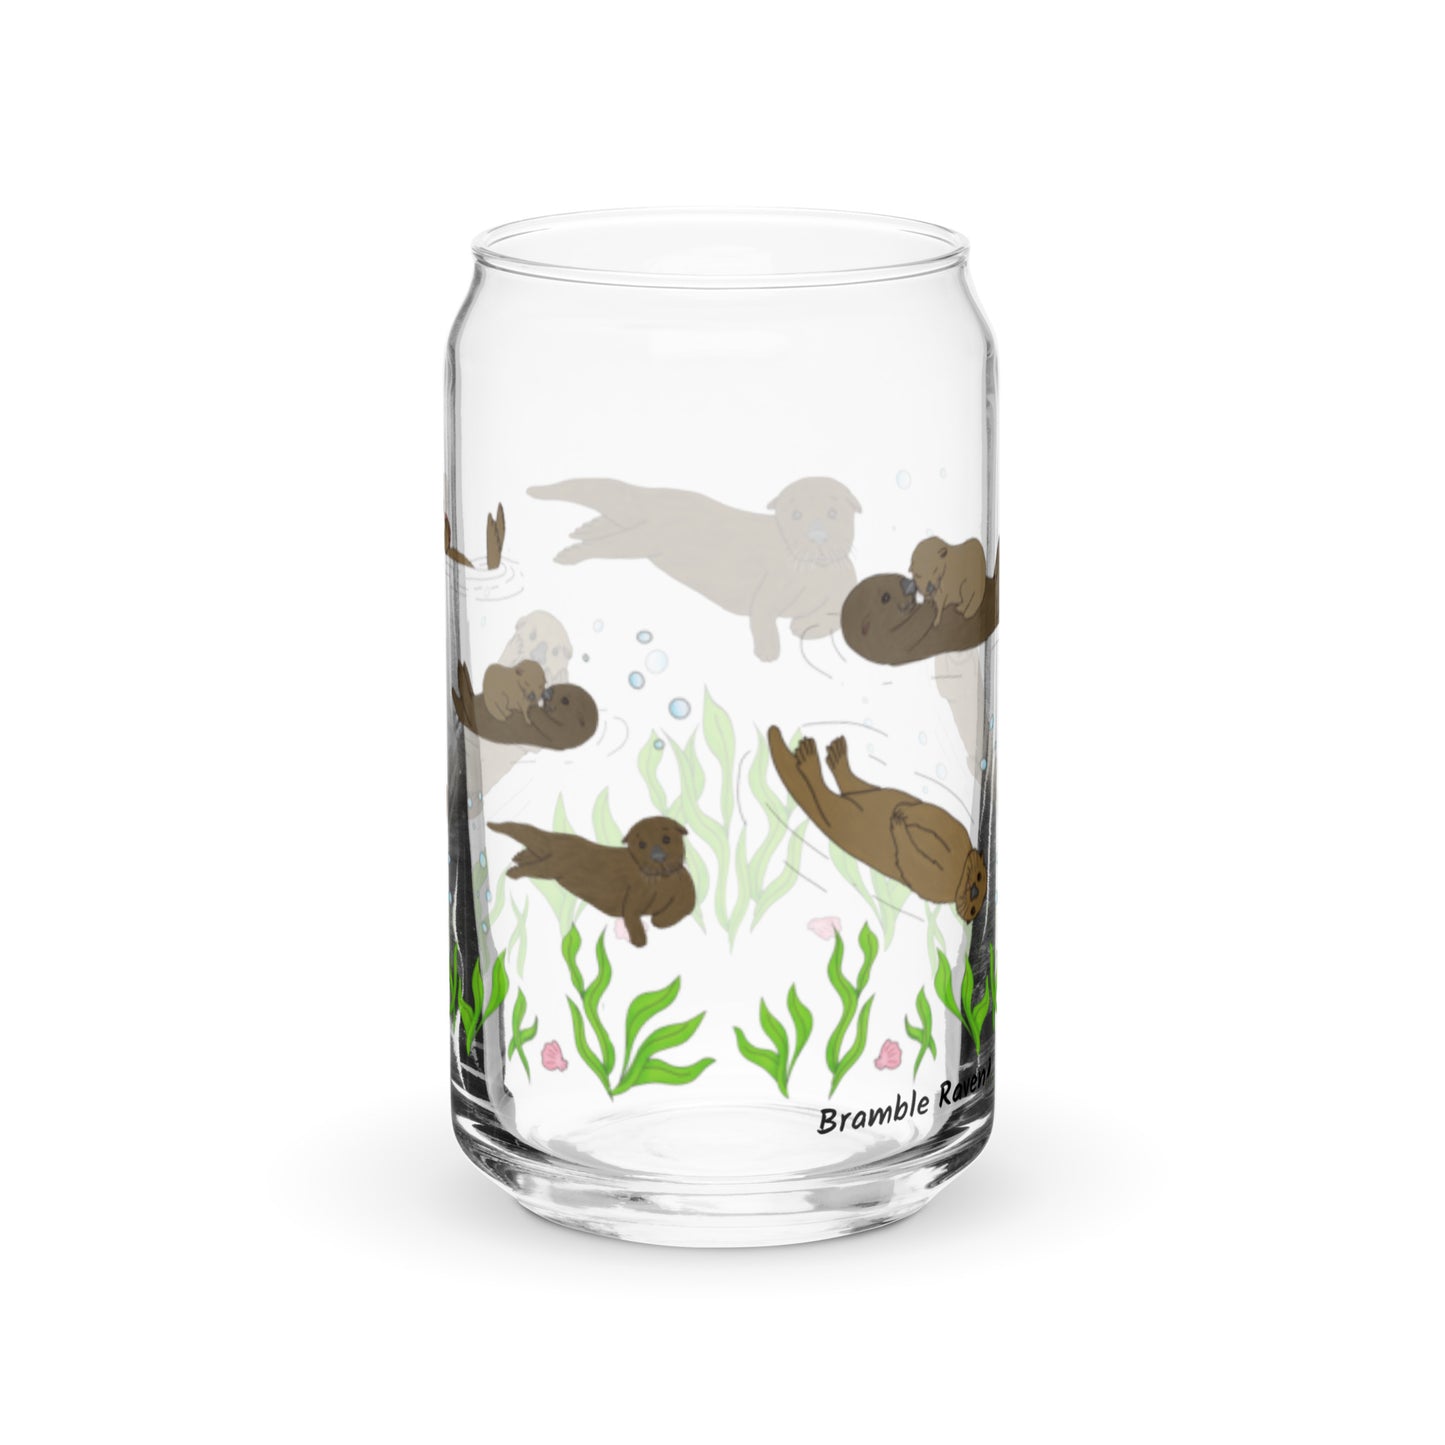 Can-shaped glass holds 16 fluid ounces. Has a design of sea otters swimming above the seaweed with bubble and shell accents.